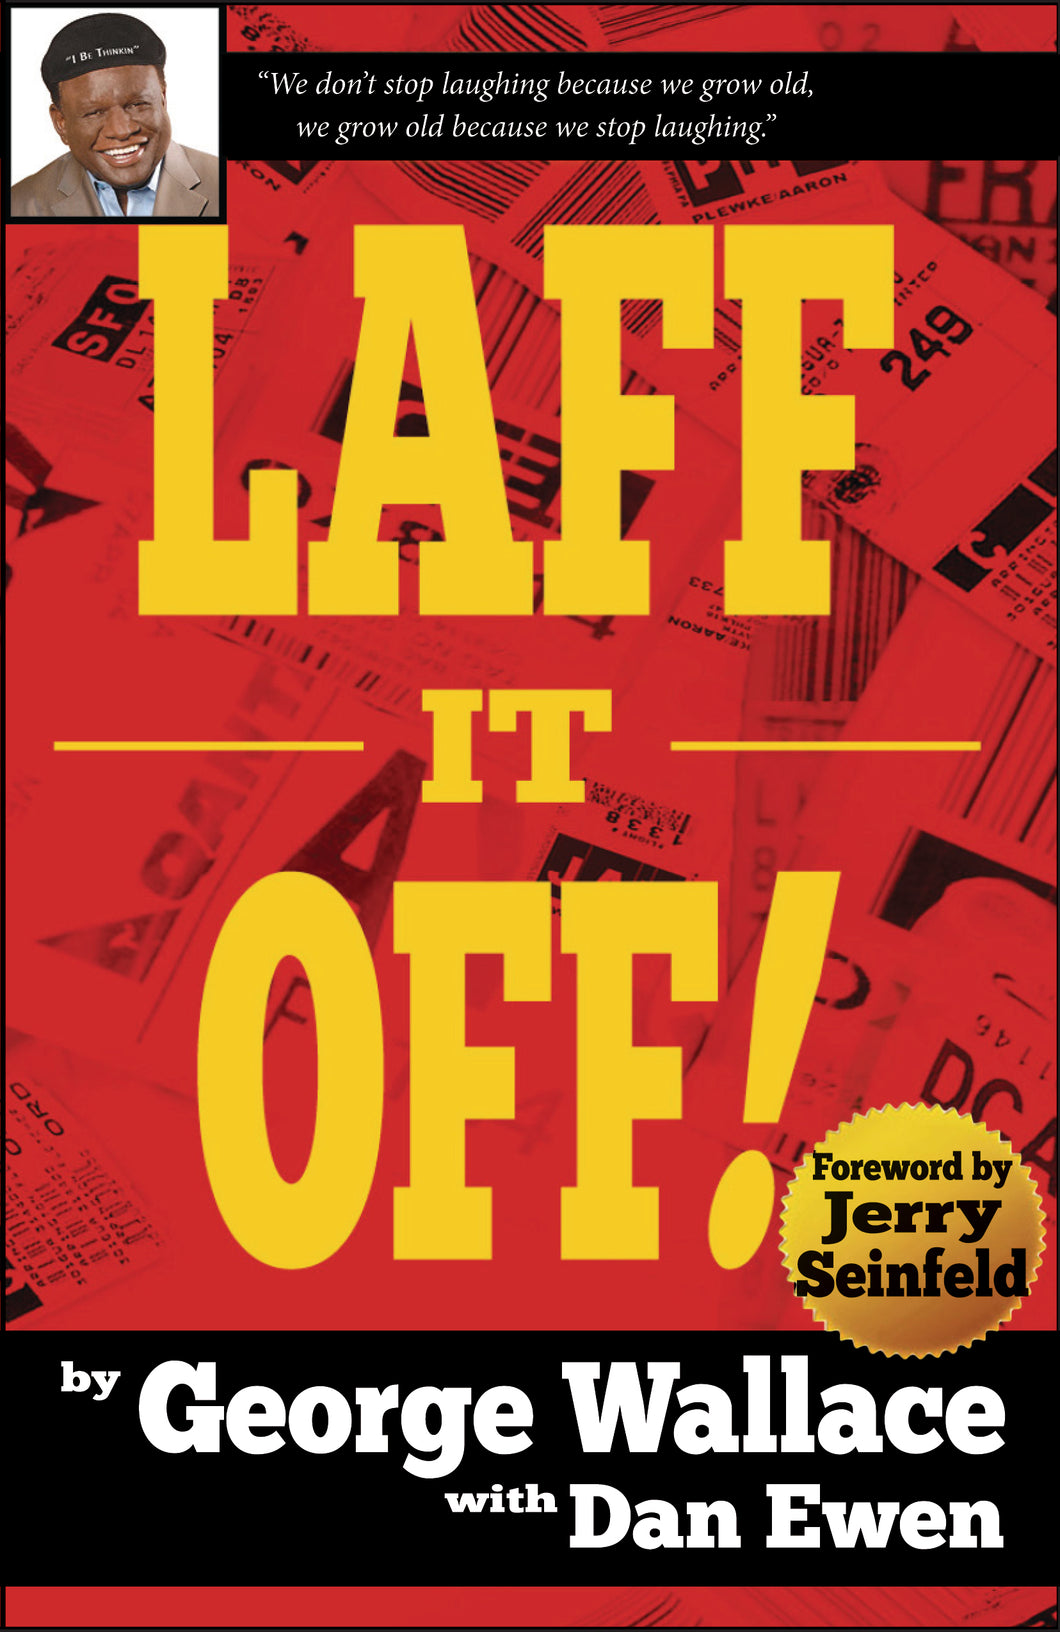 Laff it Off! - Autographed Edition (Softcover)